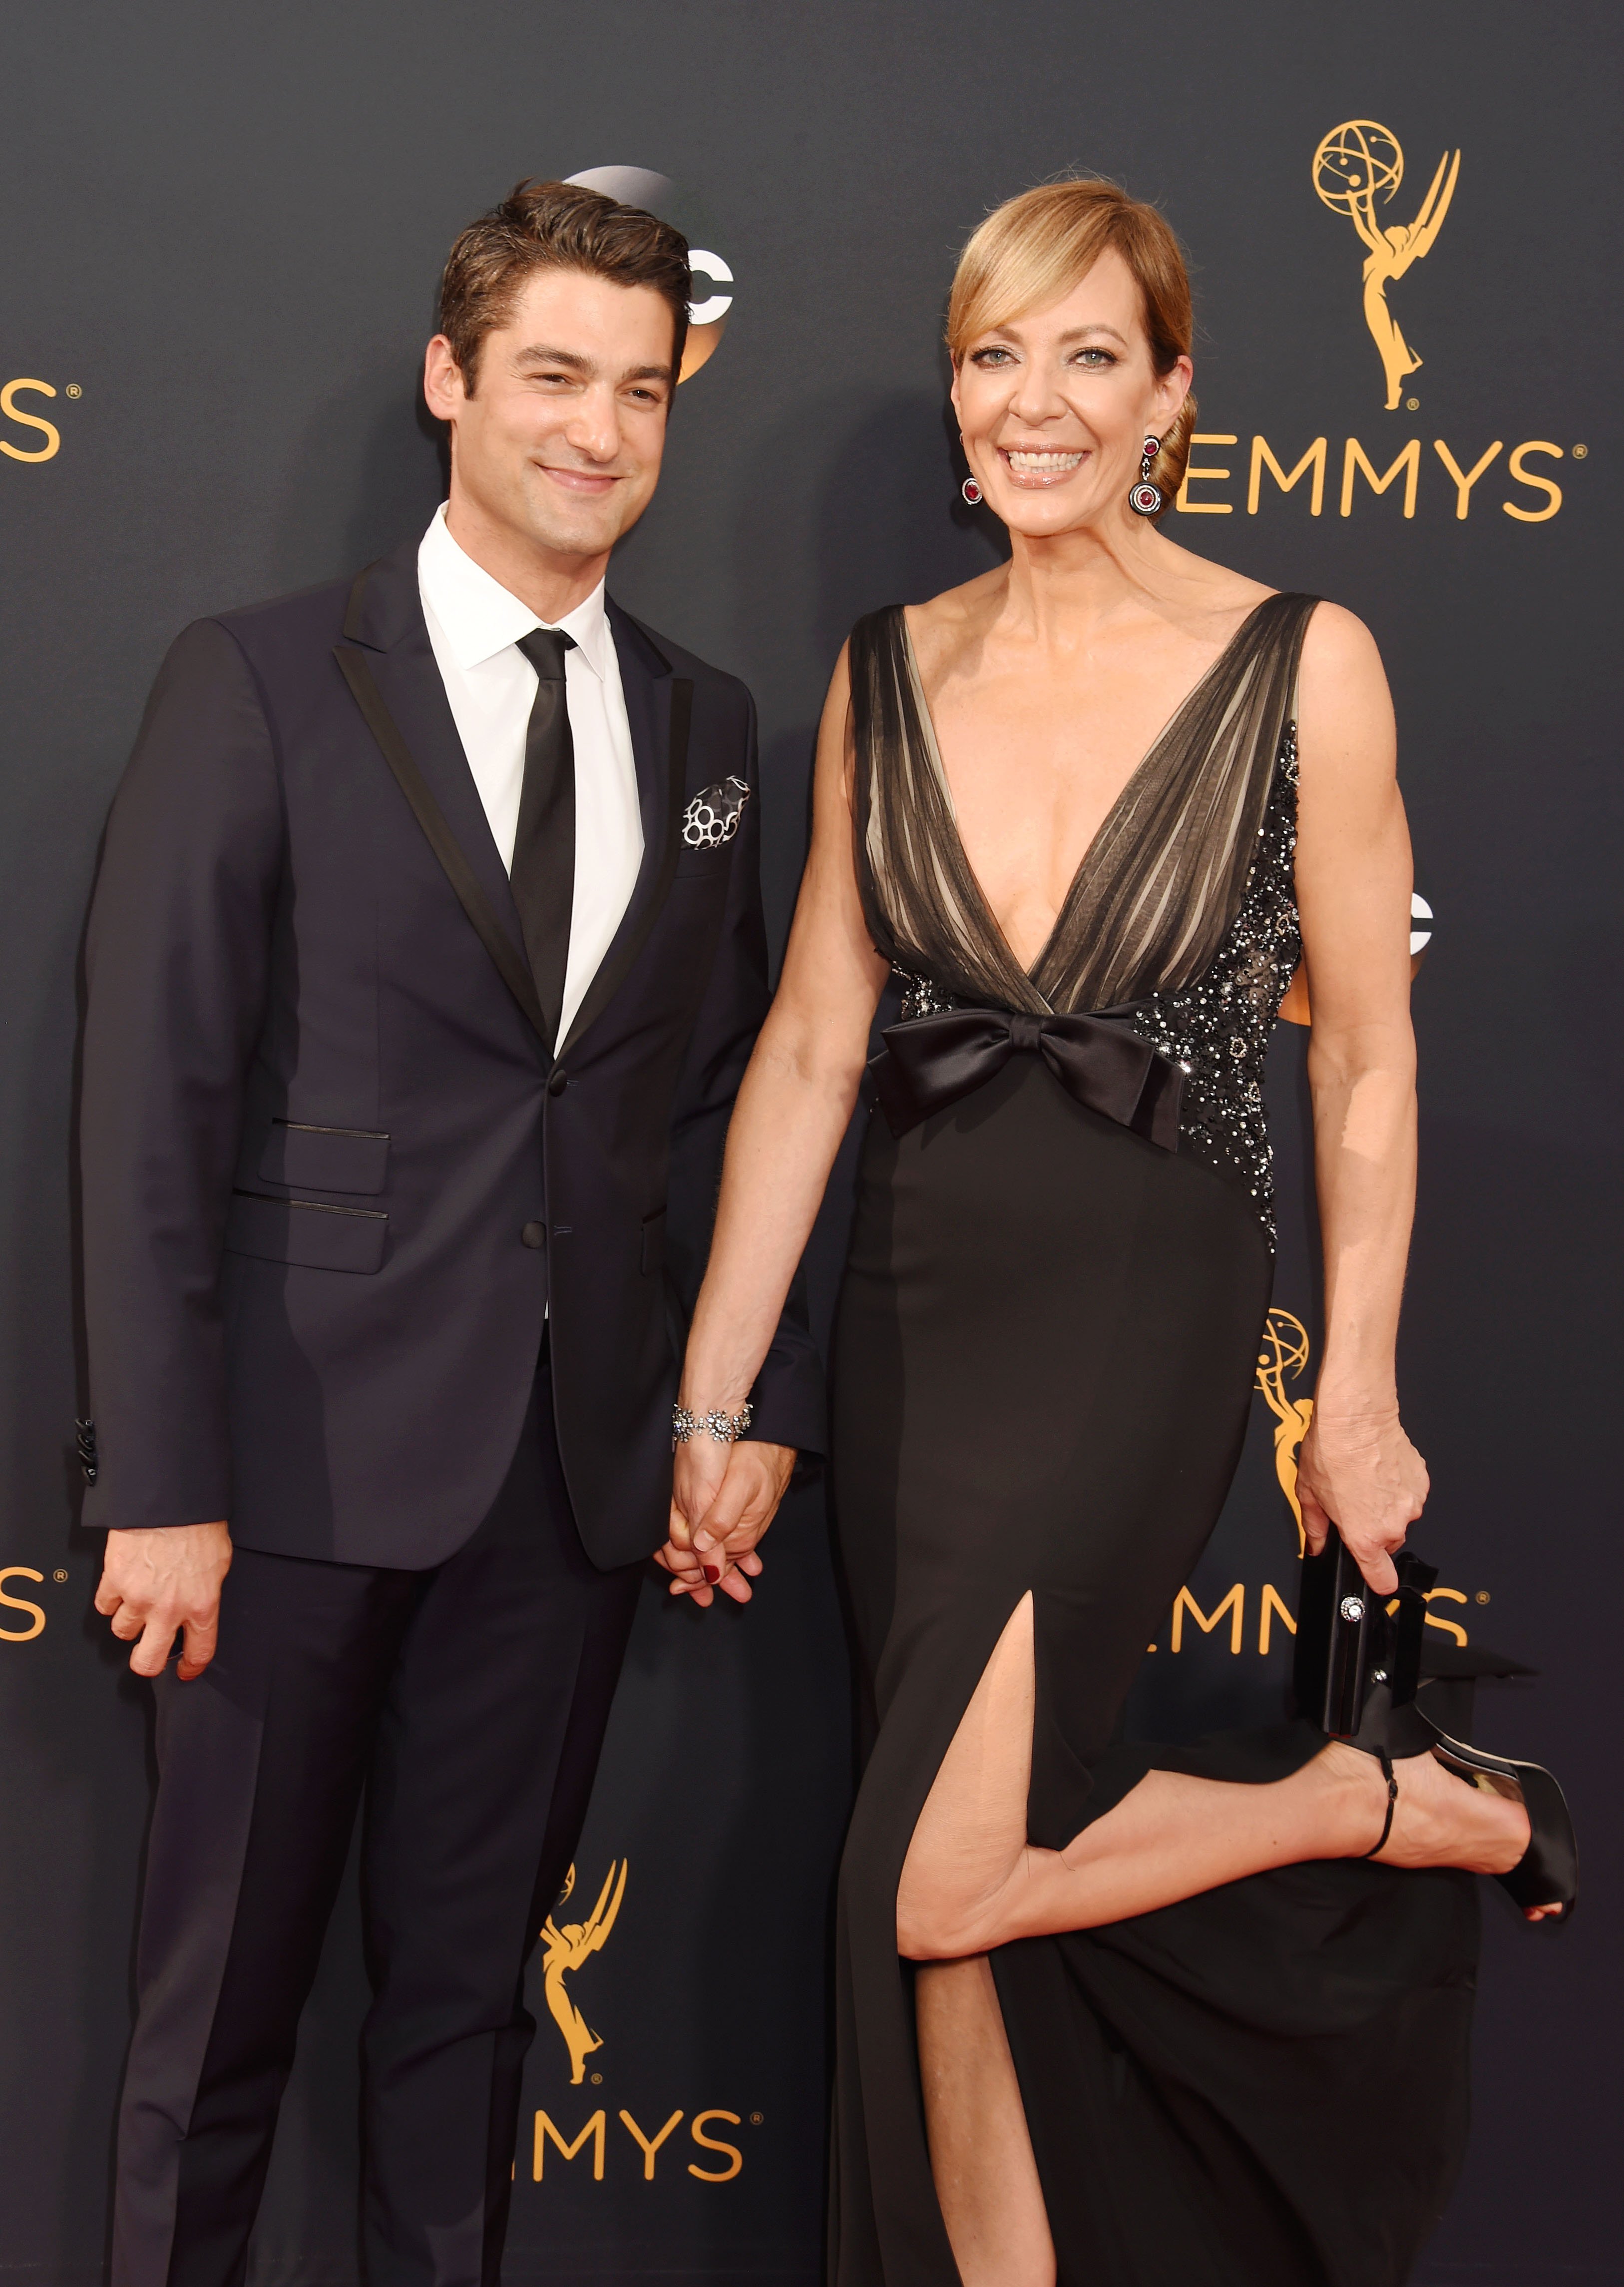 Allison Janney and Philip Joncas attending the 68th Annual Primetime Emmy Awards on September 18, 2016 in Los Angeles, California. | Source: Getty images